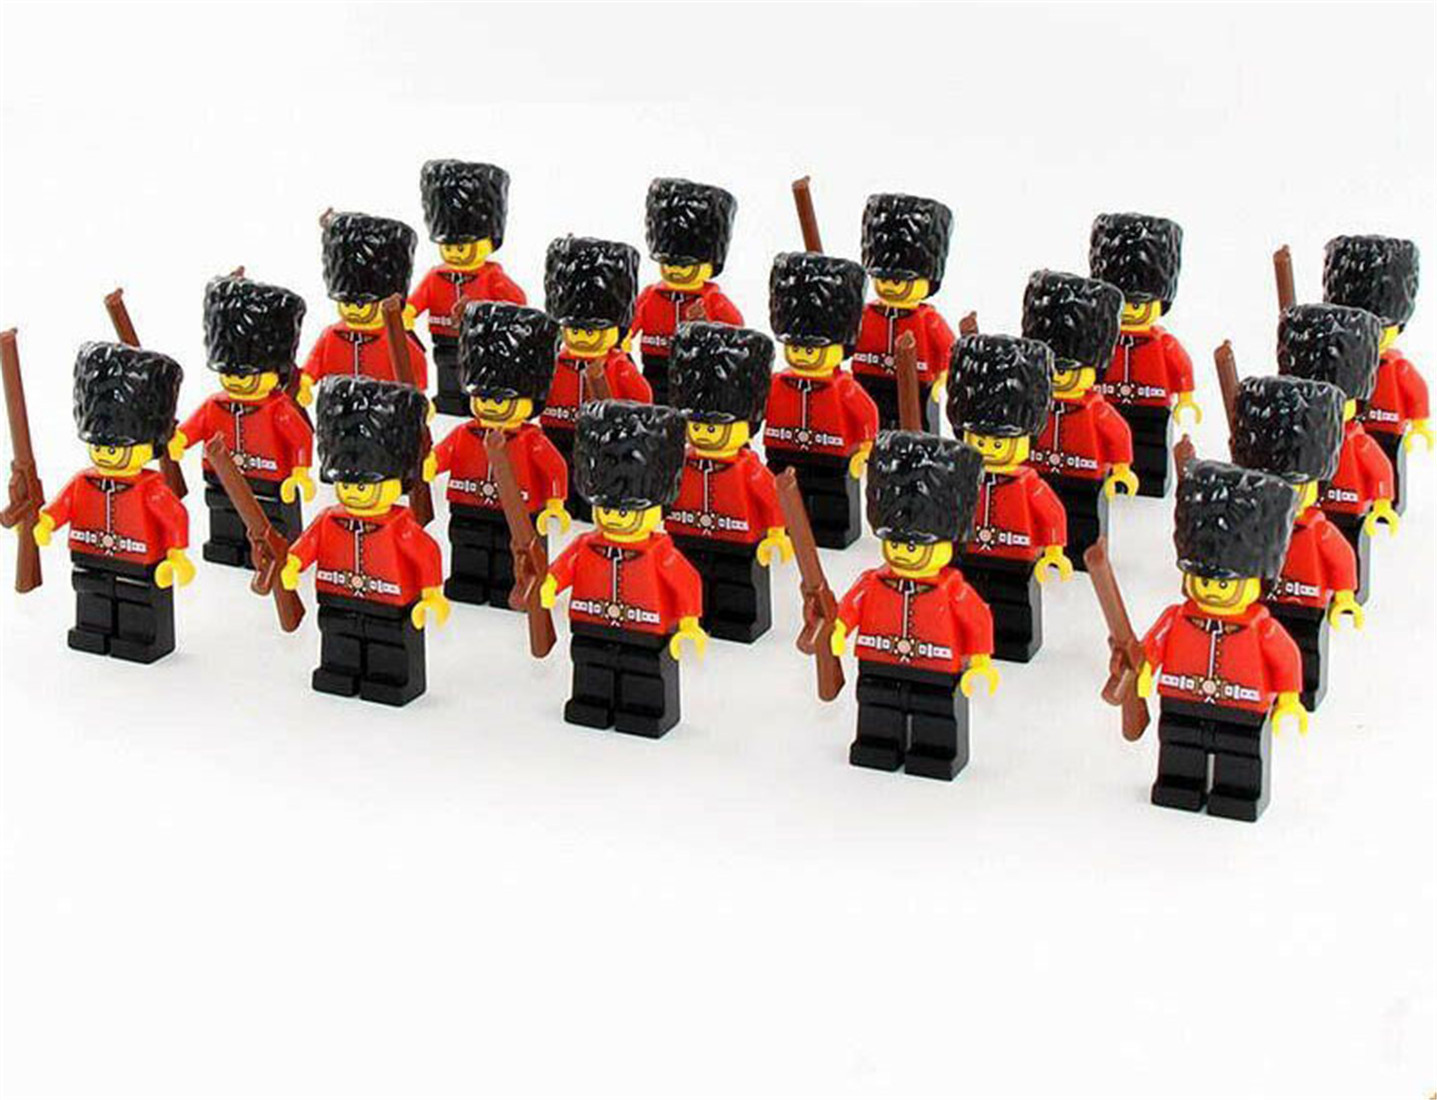 21pcs The British Royal Guard of Queen's Army Set Minifigure Building Blocks Toy